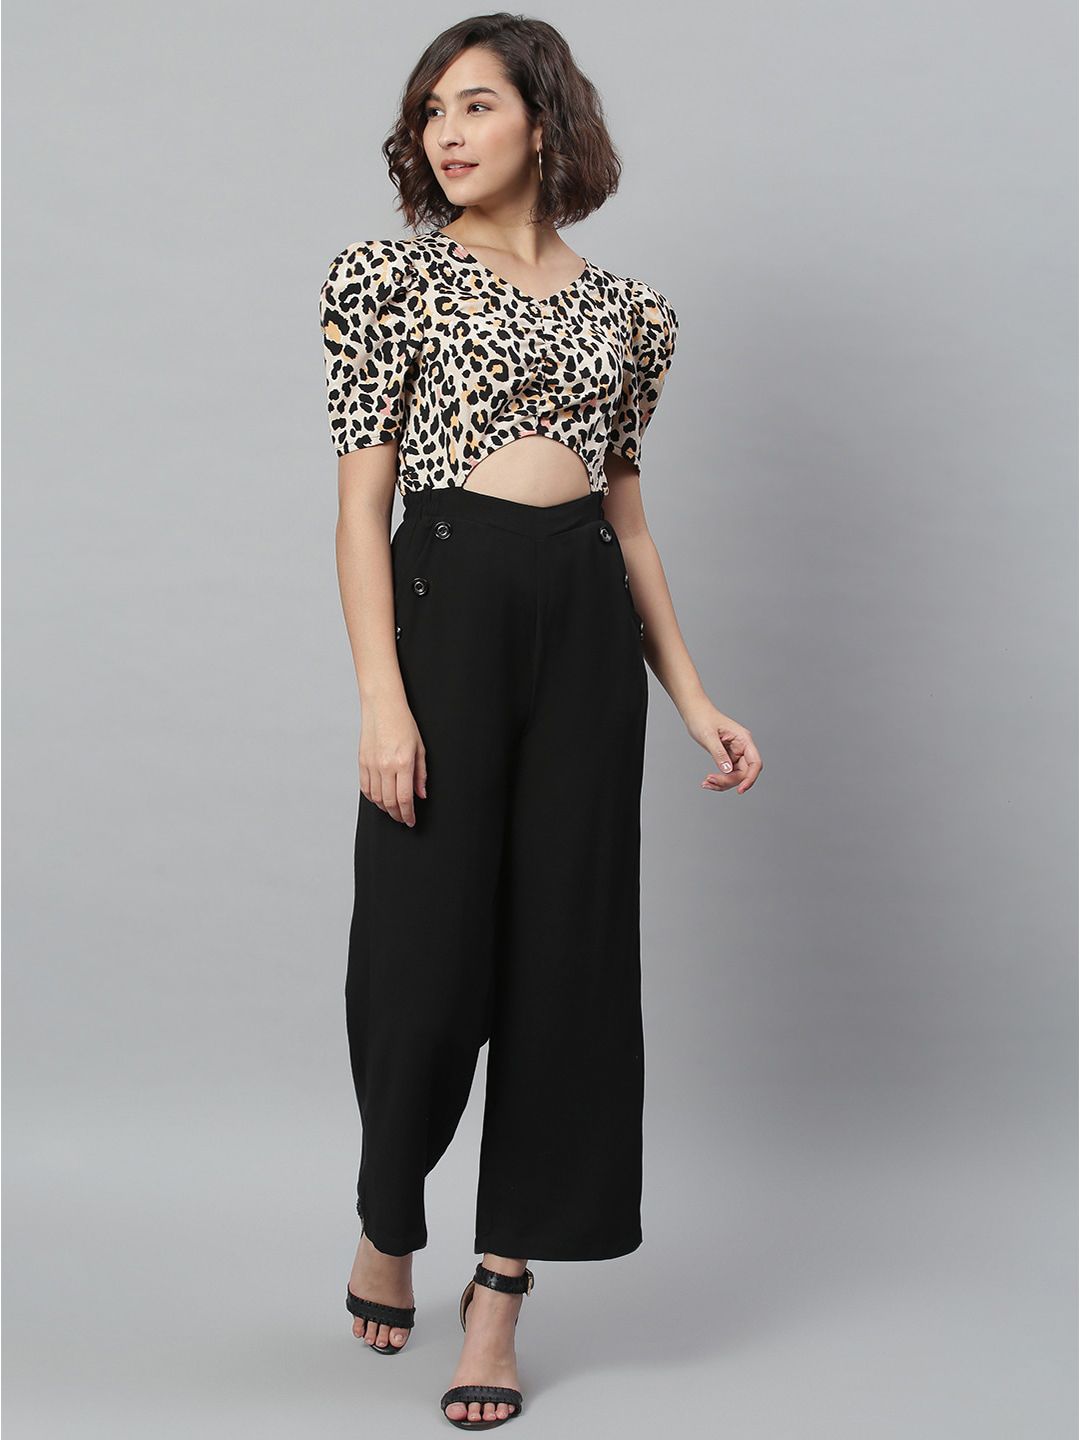 KASSUALLY Women Black & Cream-Coloured Colourblocked Leopard Printed Basic Jumpsuit Price in India